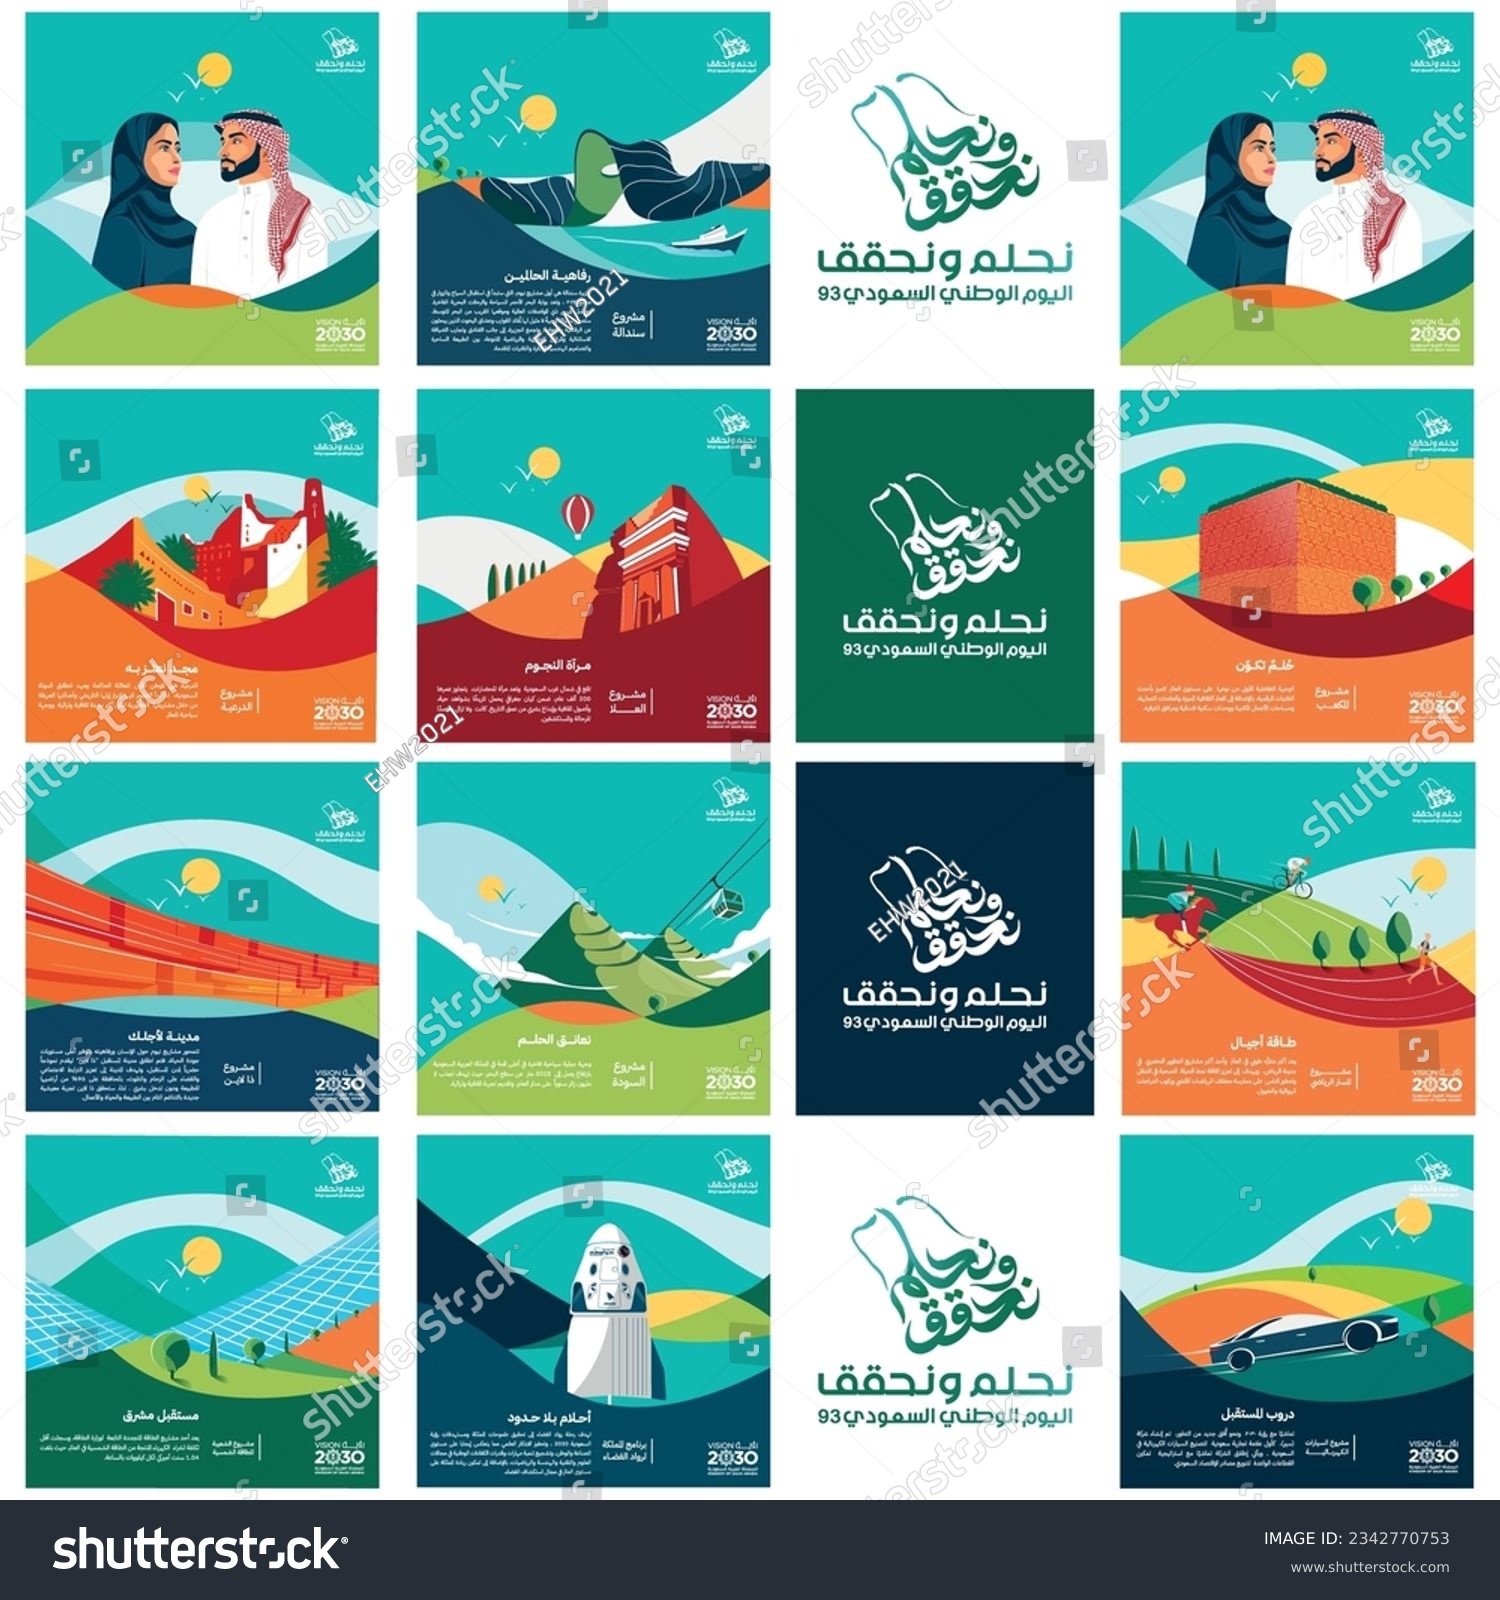 Saudi National day 93 Square Design and logo with Arabic text (We dream and achieve) and (Saudi national day 93) beautiful modern flat logo, colorful and simple #2342770753